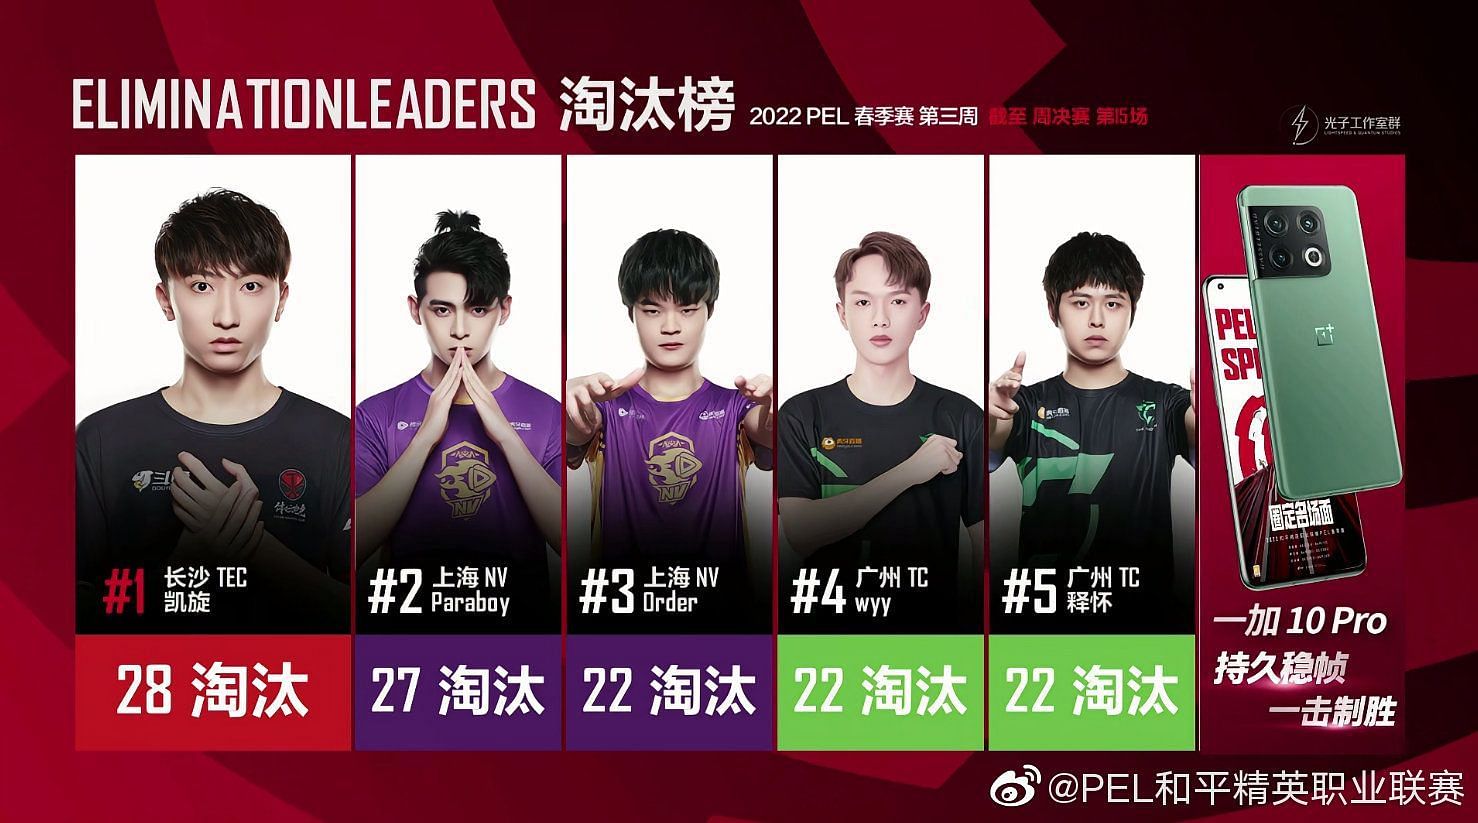 Top 5 players from Week 3 Finals (Image via Tencent)